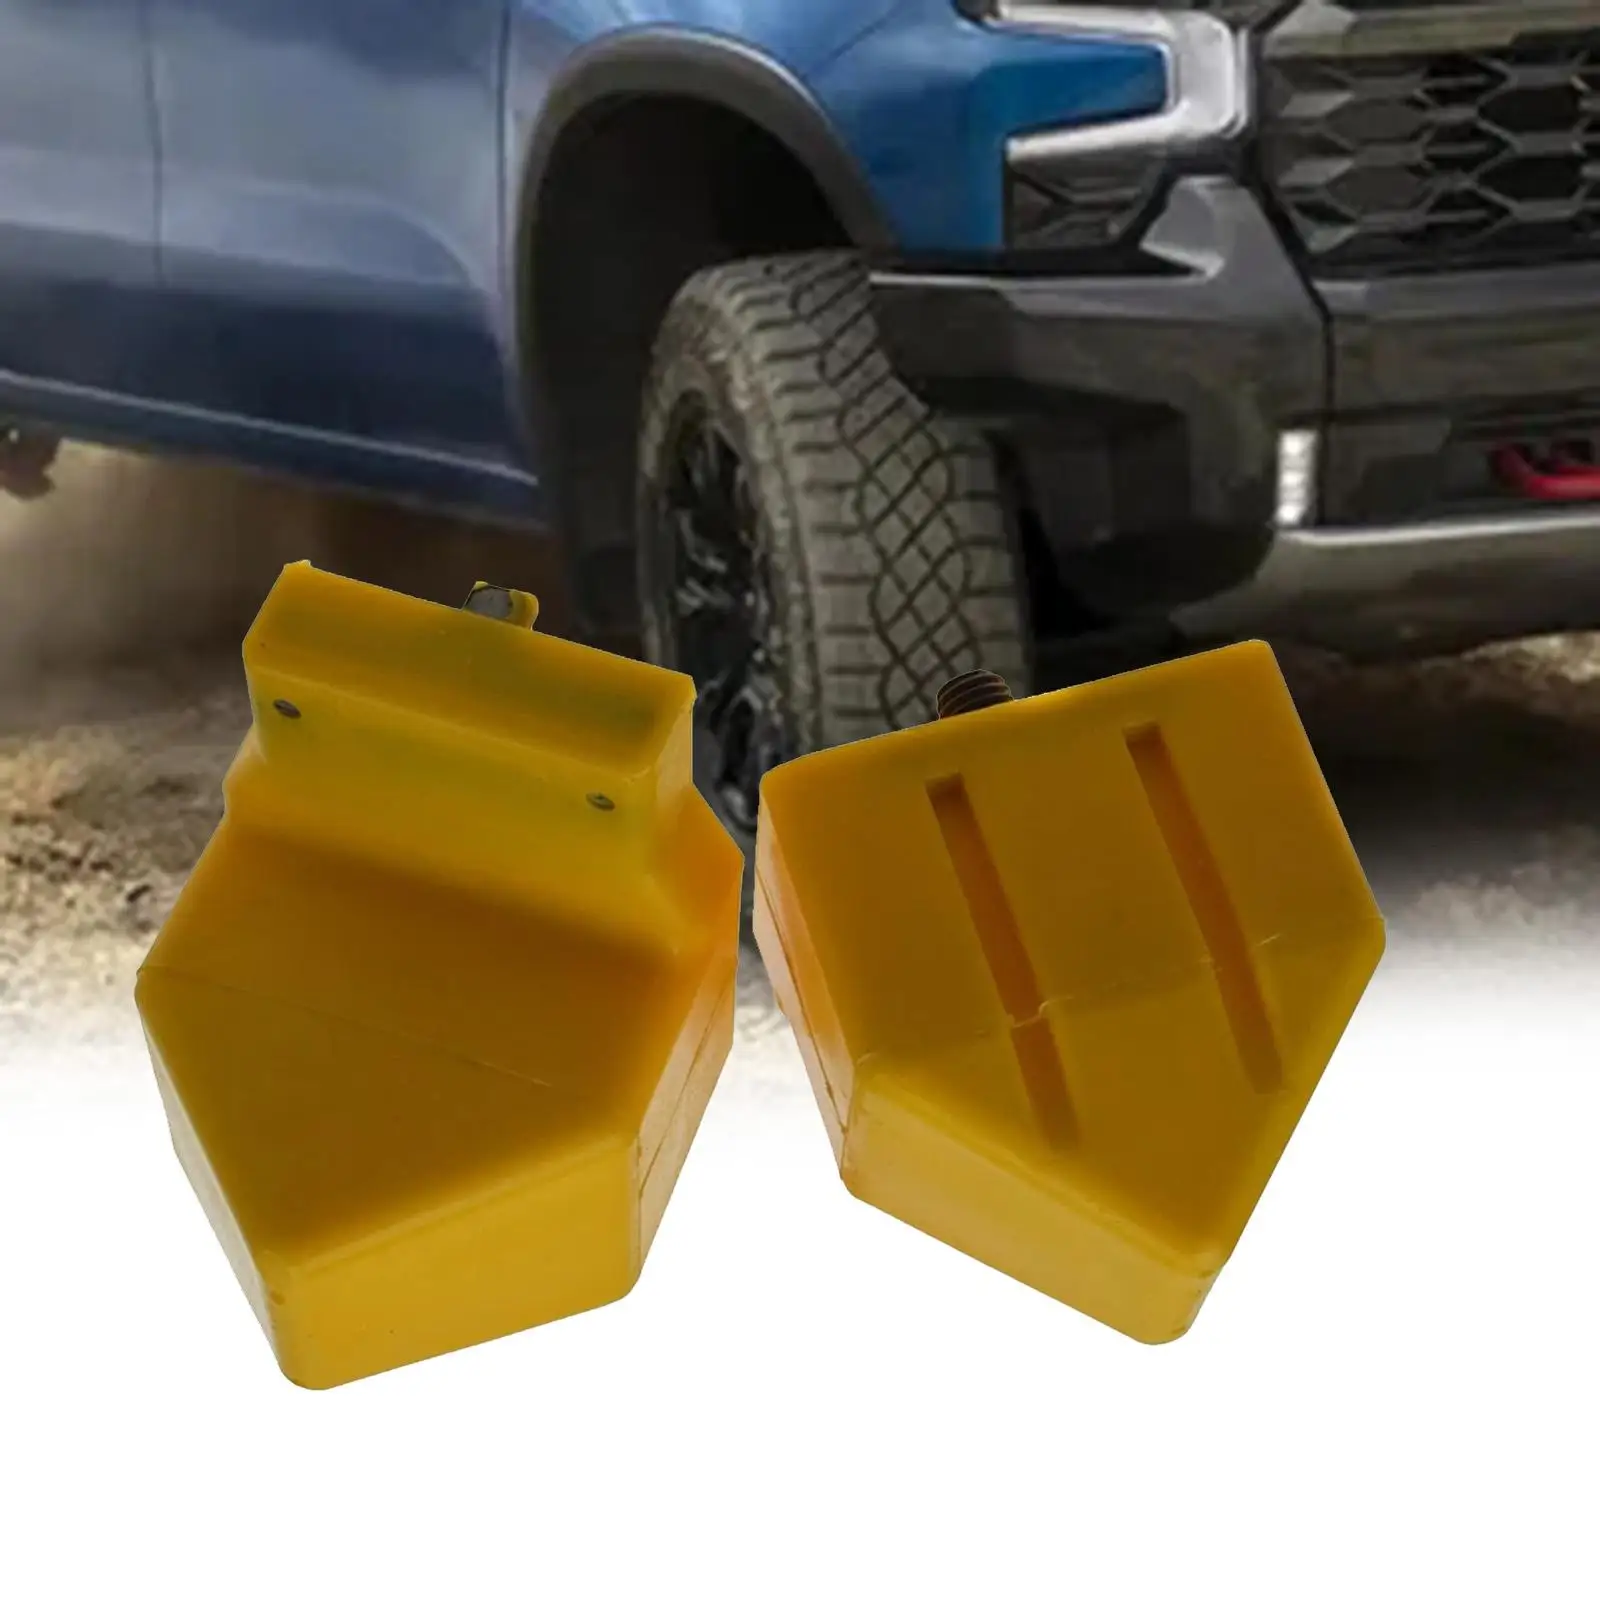 2x Front bumpers stopper Professional for GMC Sierra 2500 HD Pickup Truck SUV